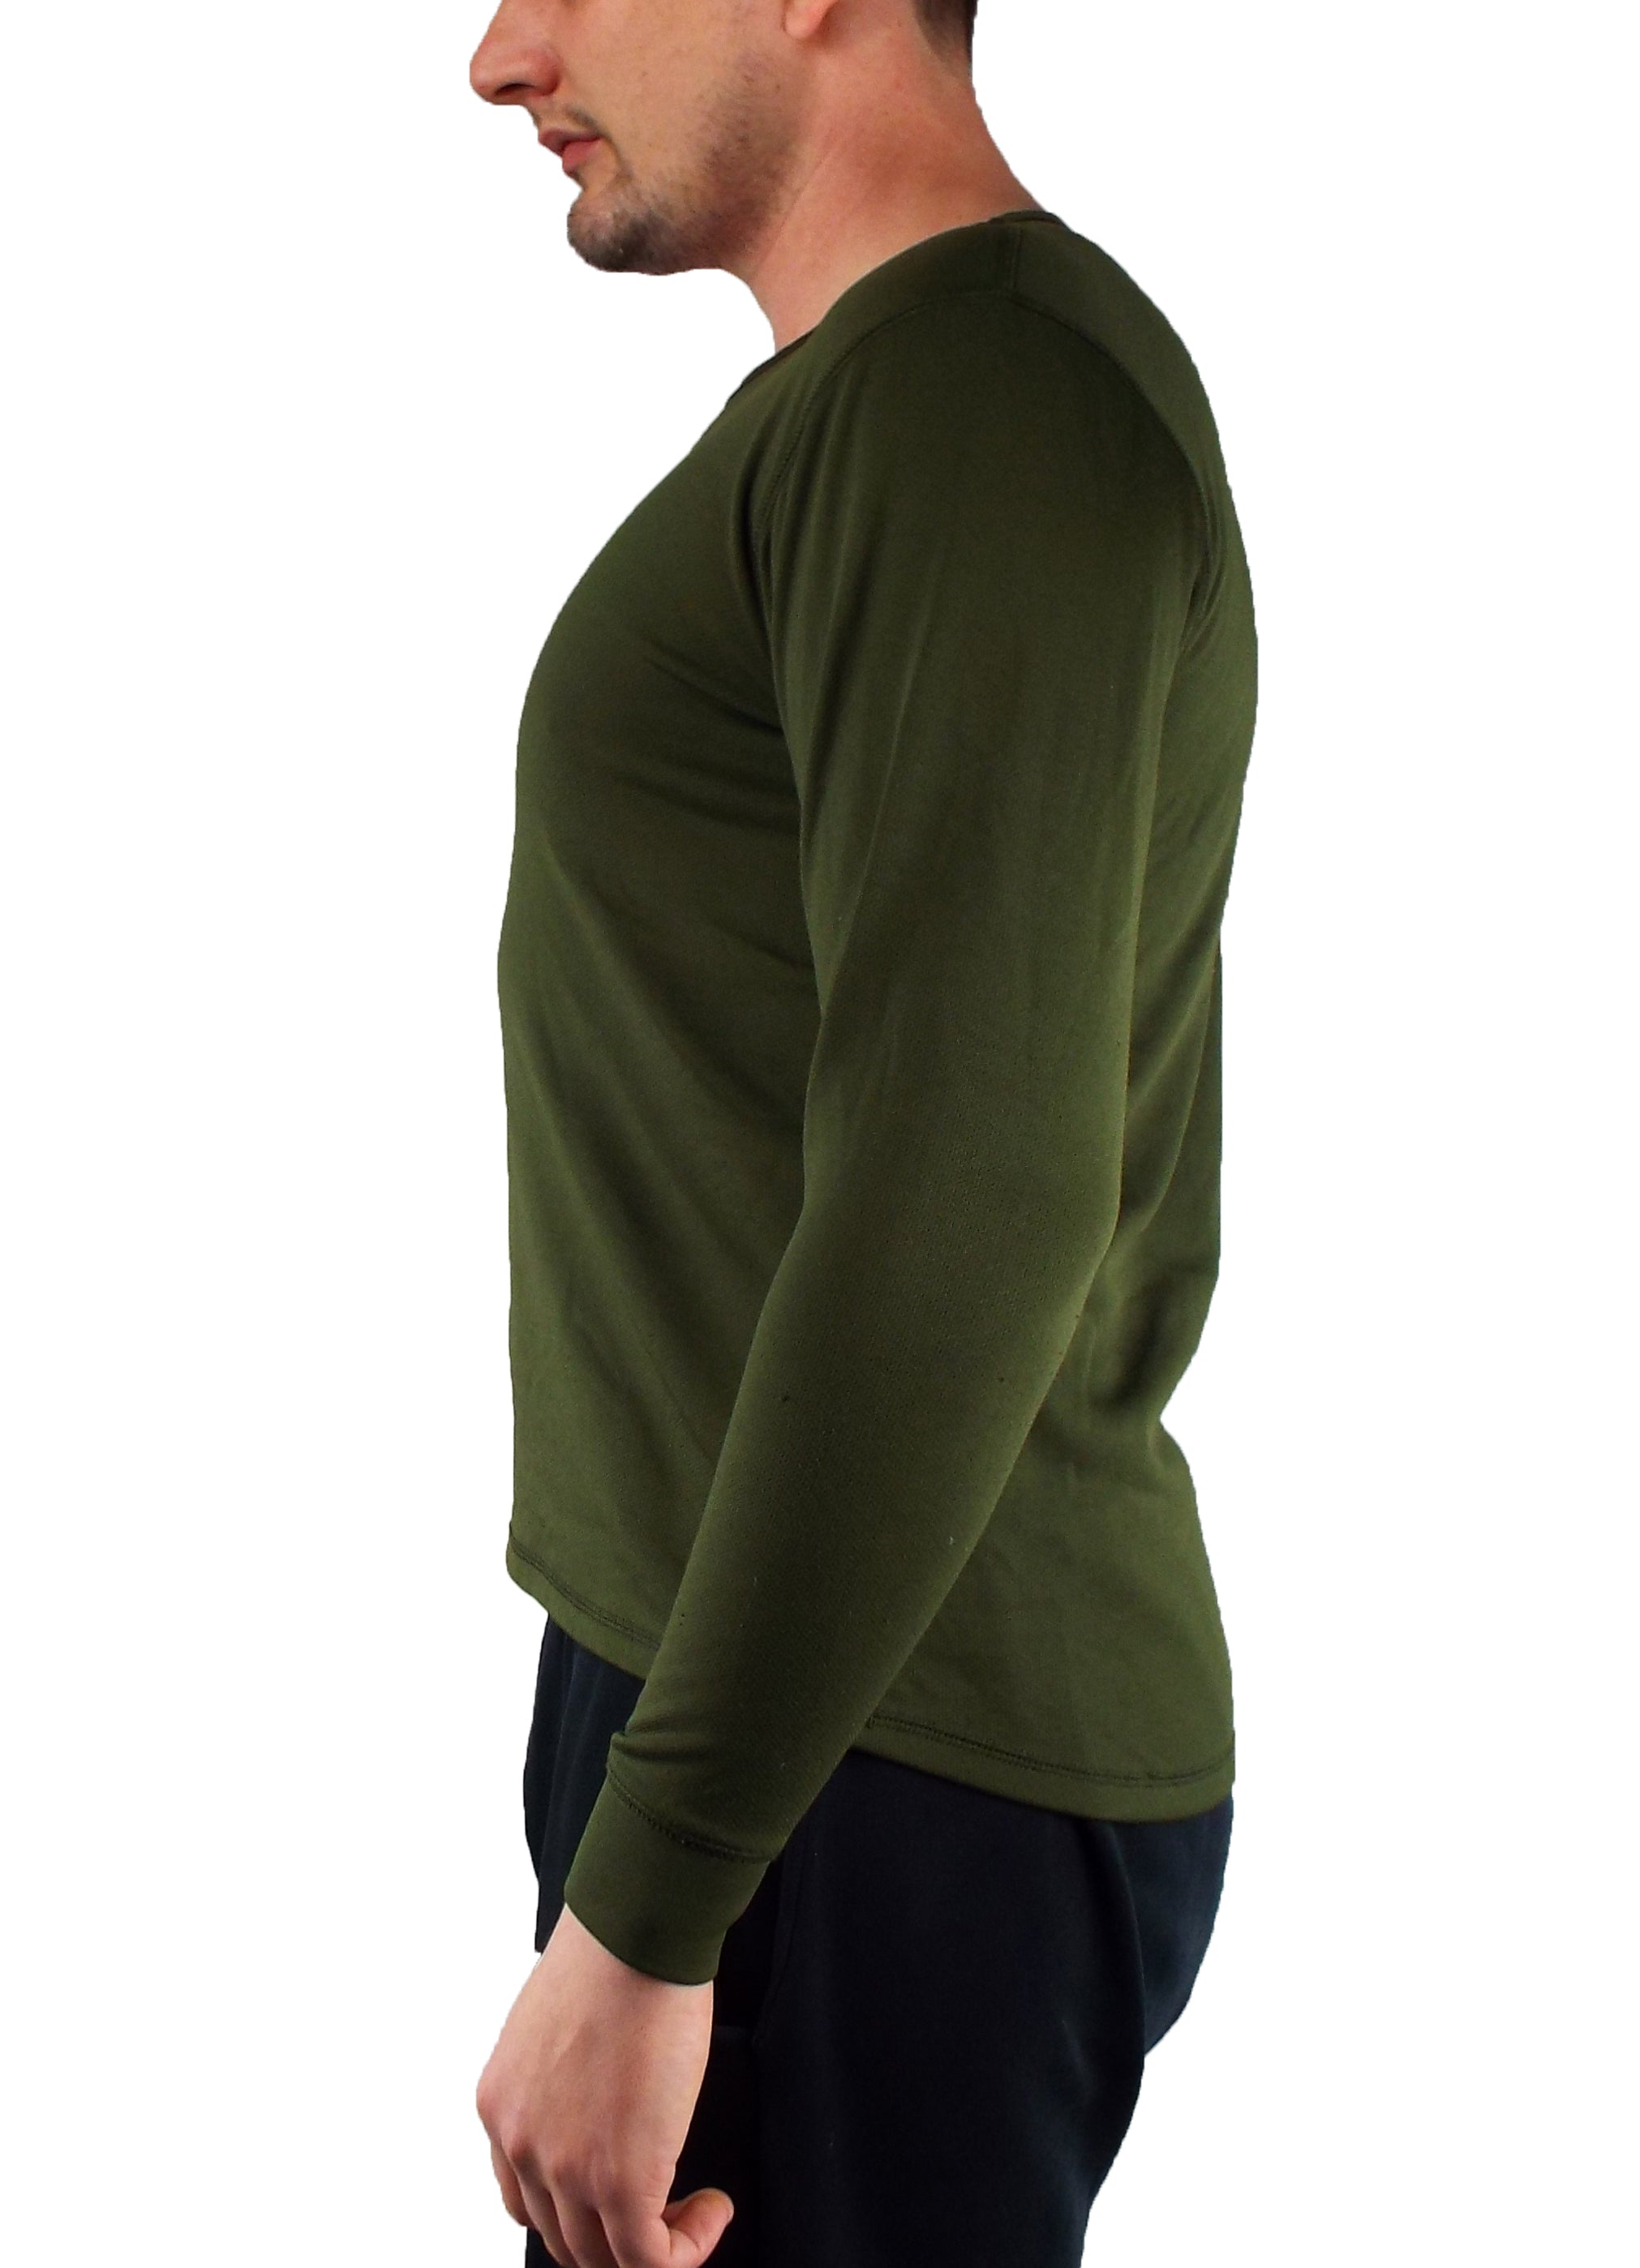 British Army - Grade 1 - Long Sleeve Thermal Top - Forces Uniform and Kit